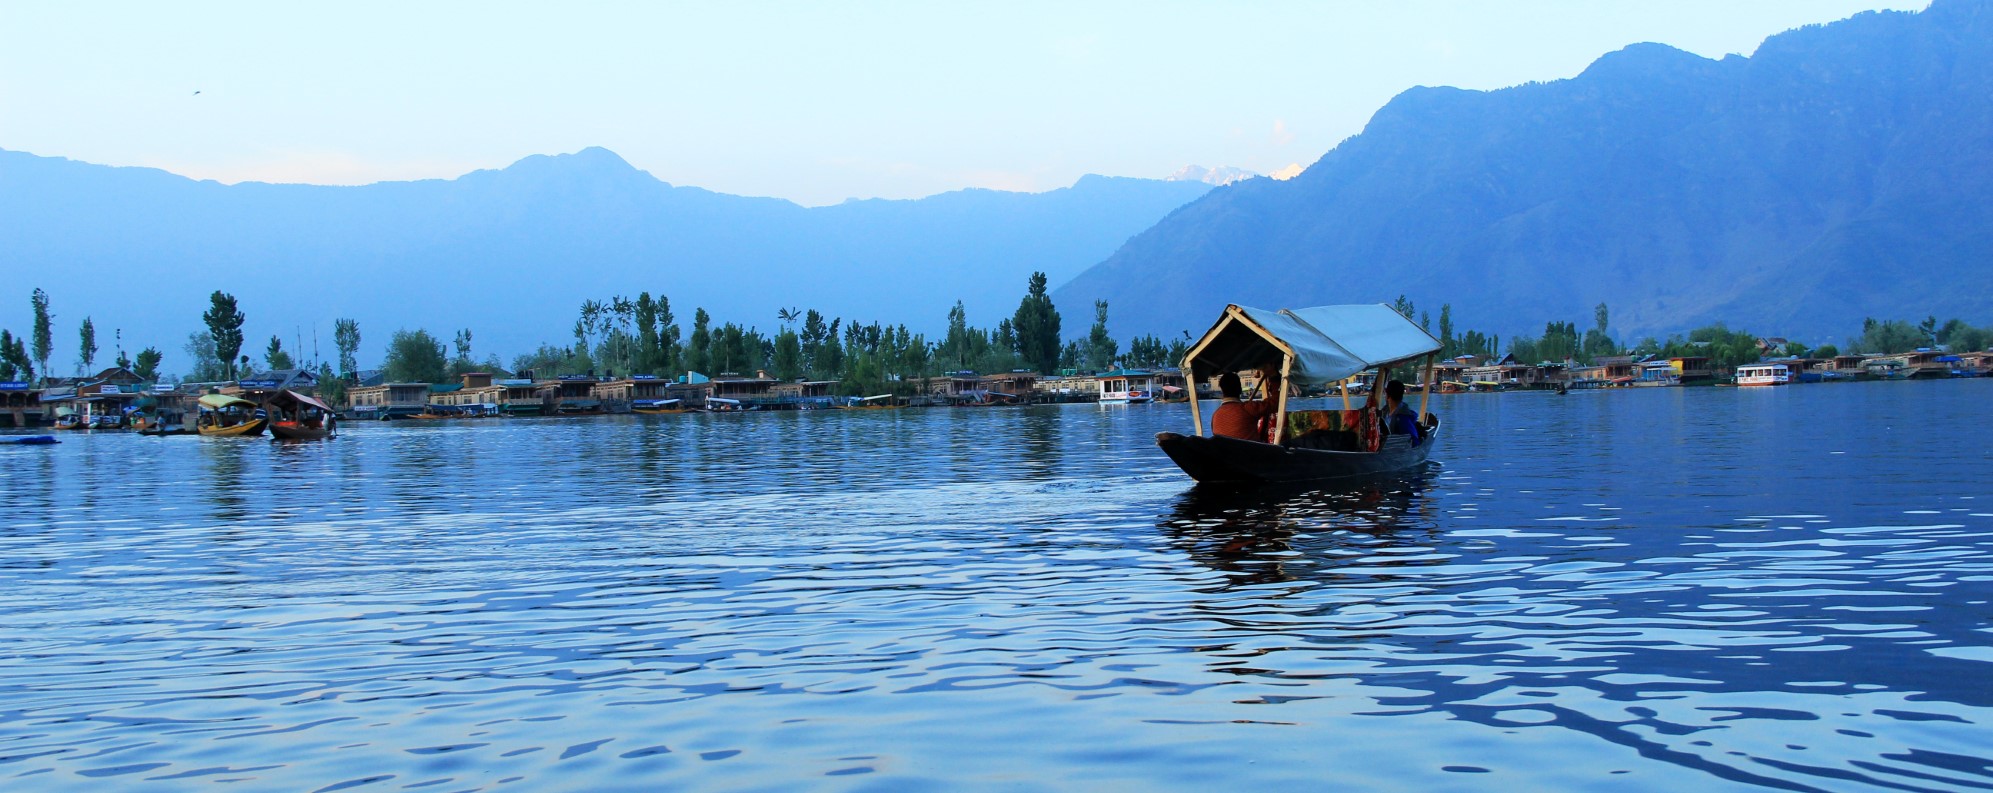 Srinagar-Places to Visit in May in India